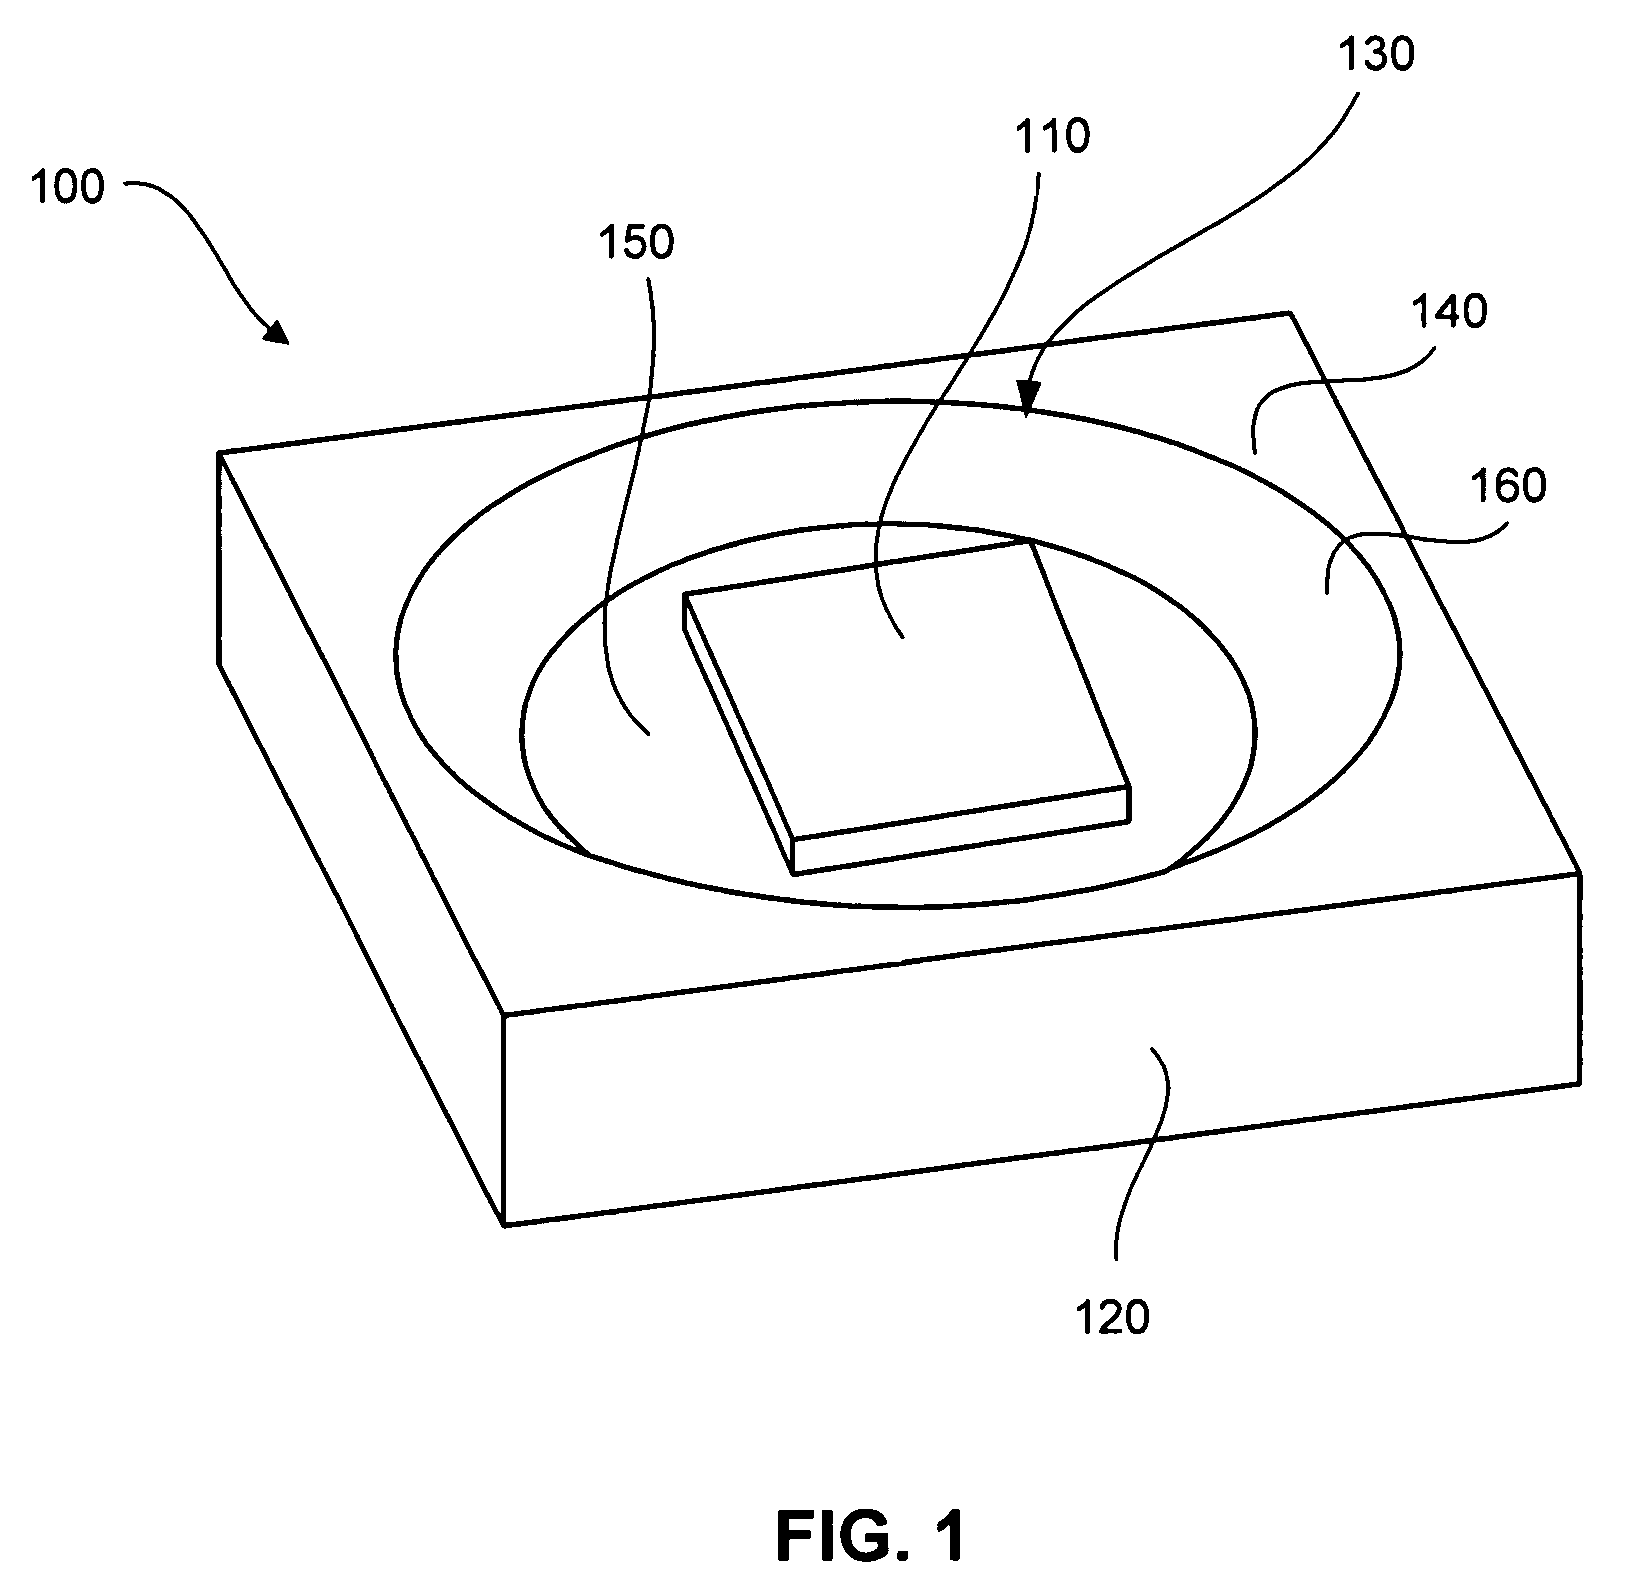 High power LED package with universal bonding pads and interconnect arrangement